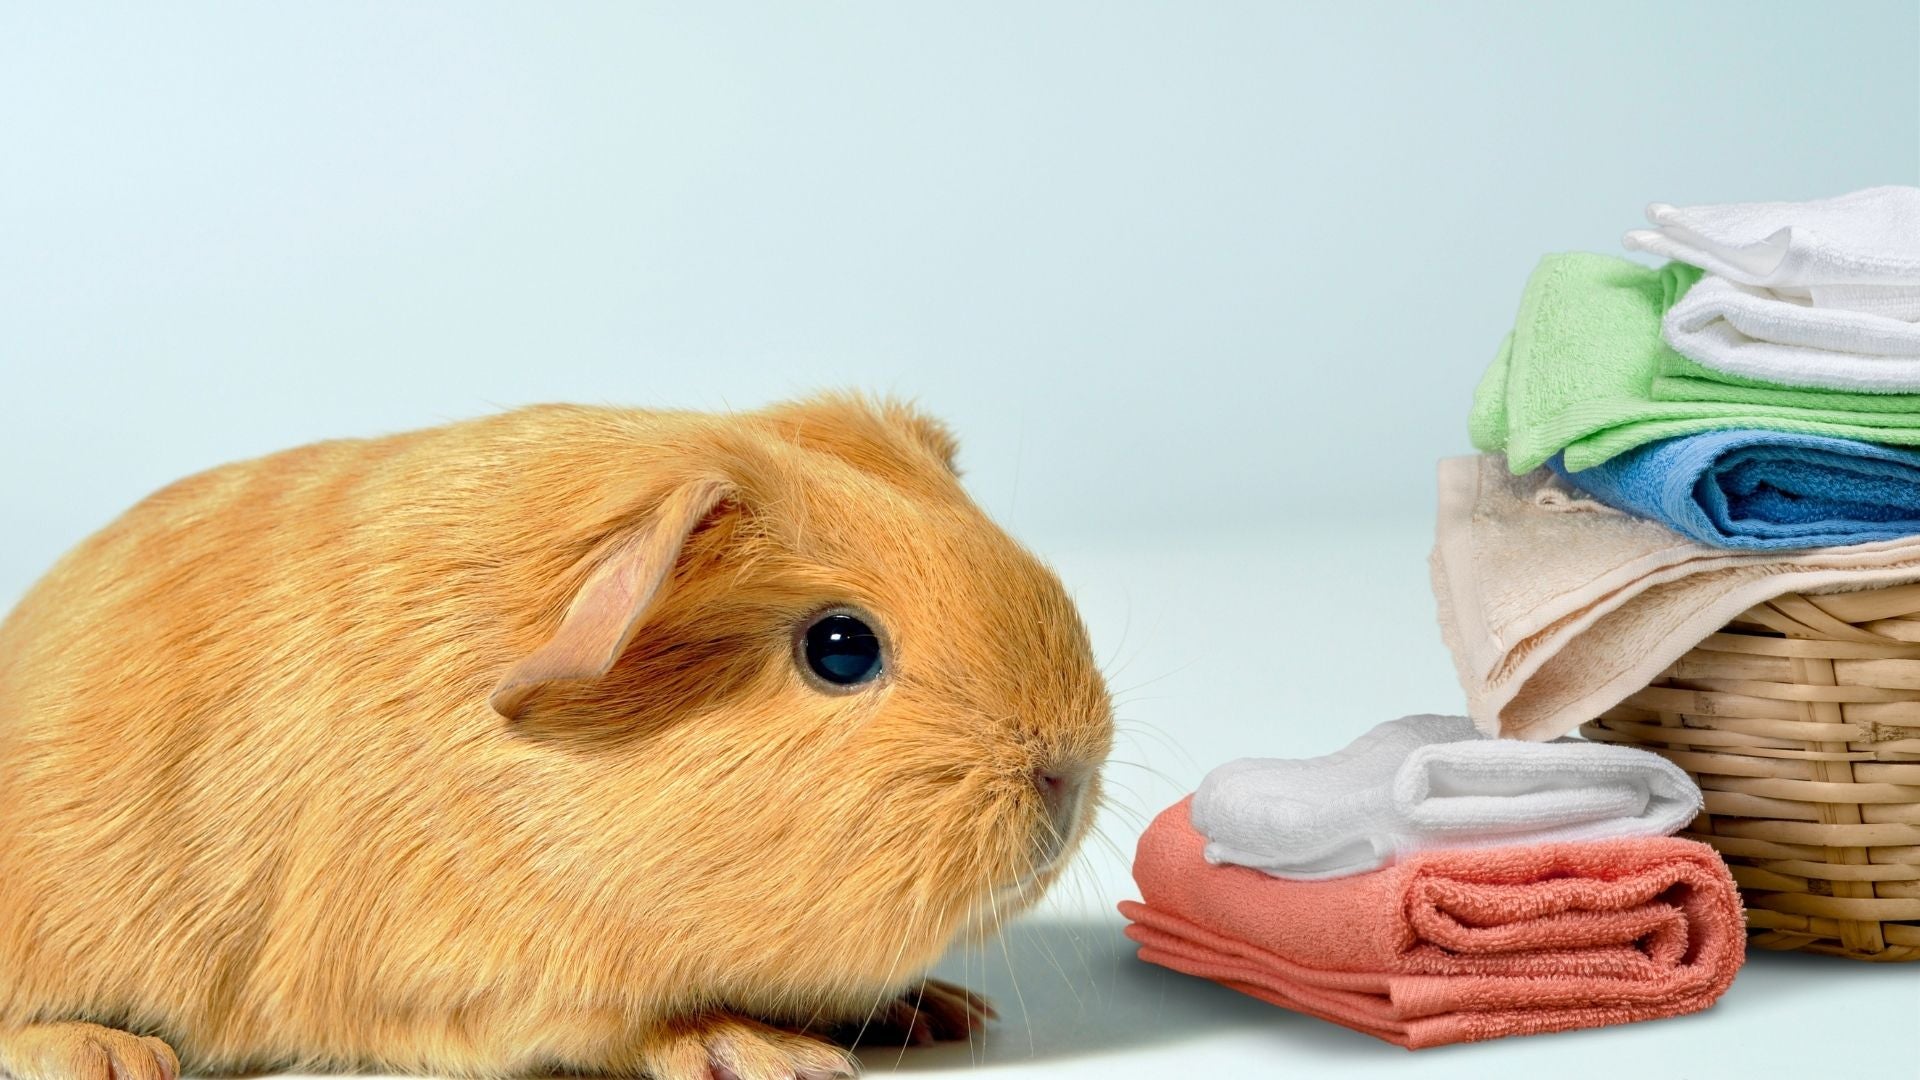 Yellow guinea pig sitting next to a laundry basket on a blue background